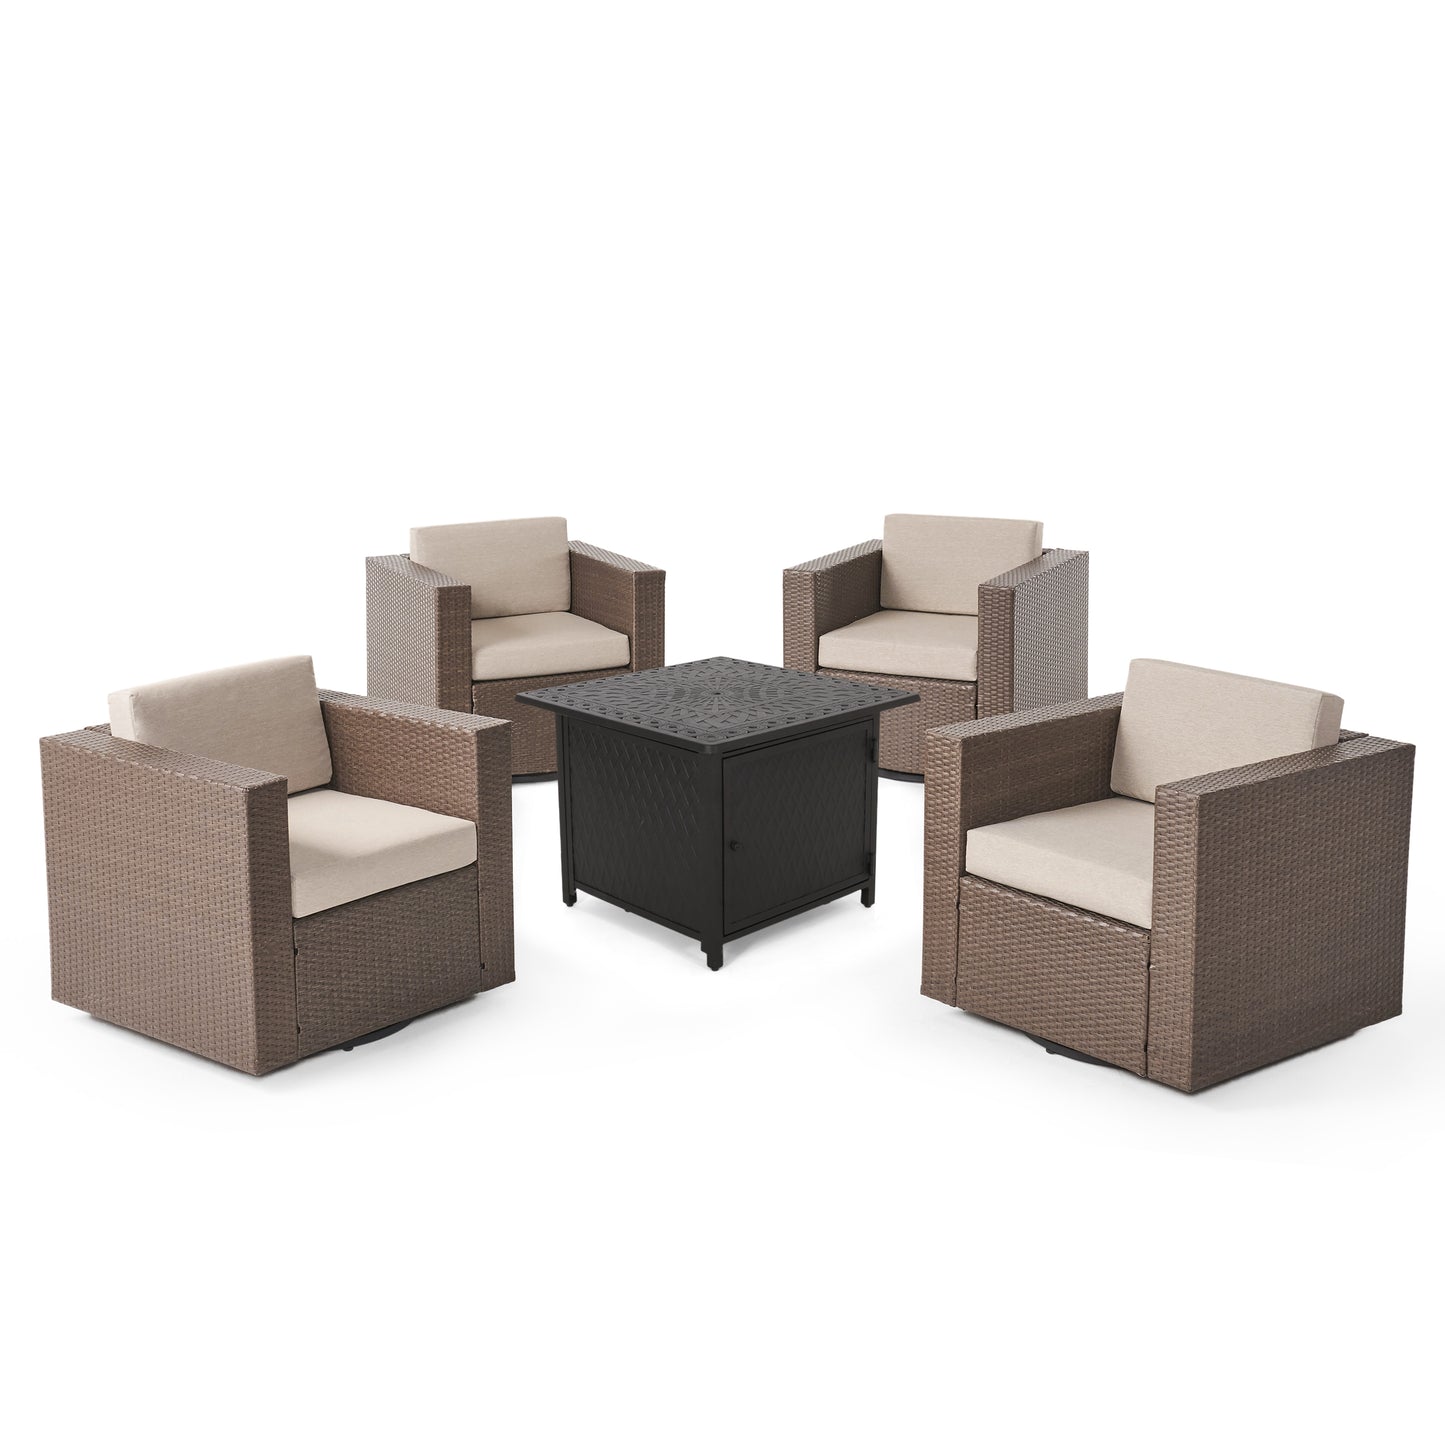 Calella Outdoor 4 Seater Wicker Swivel Chair and Fire Pit Set